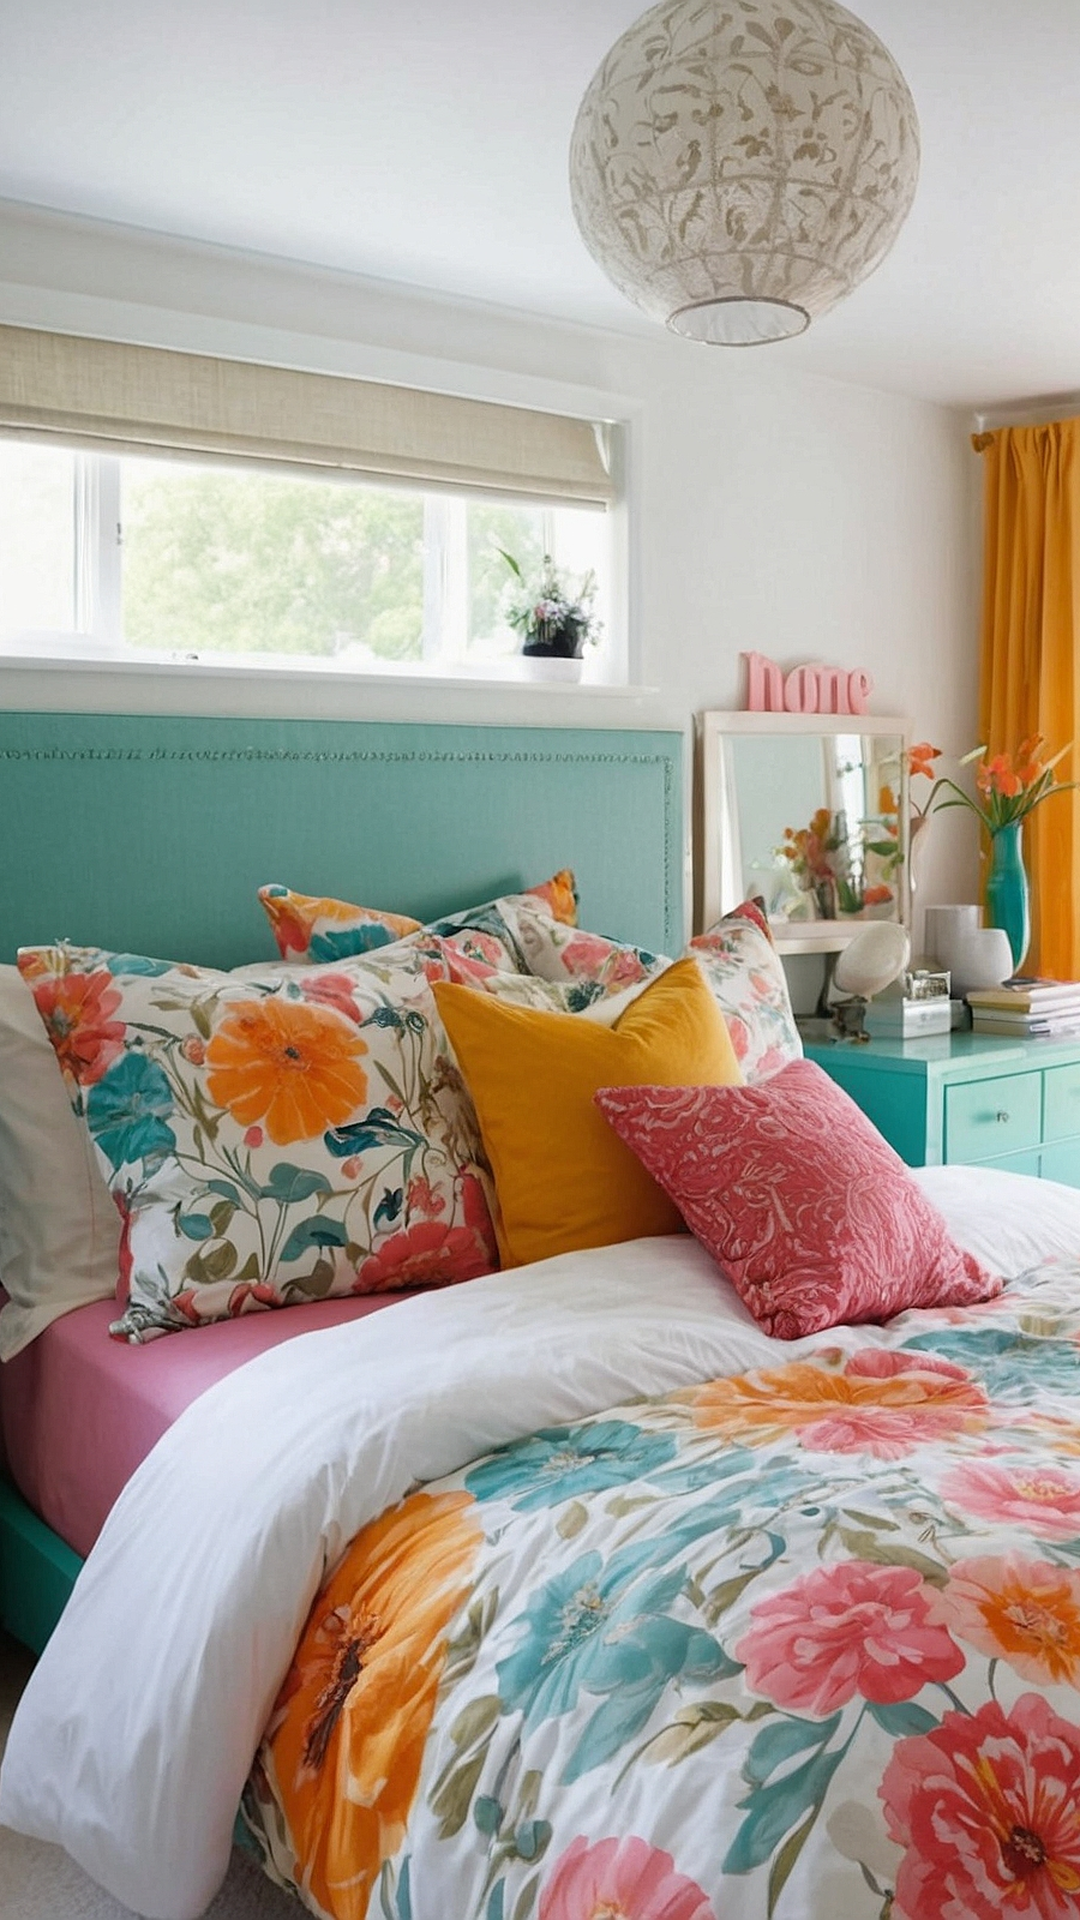 Transform Your Sleep Space: Home Bedroom Refreshes